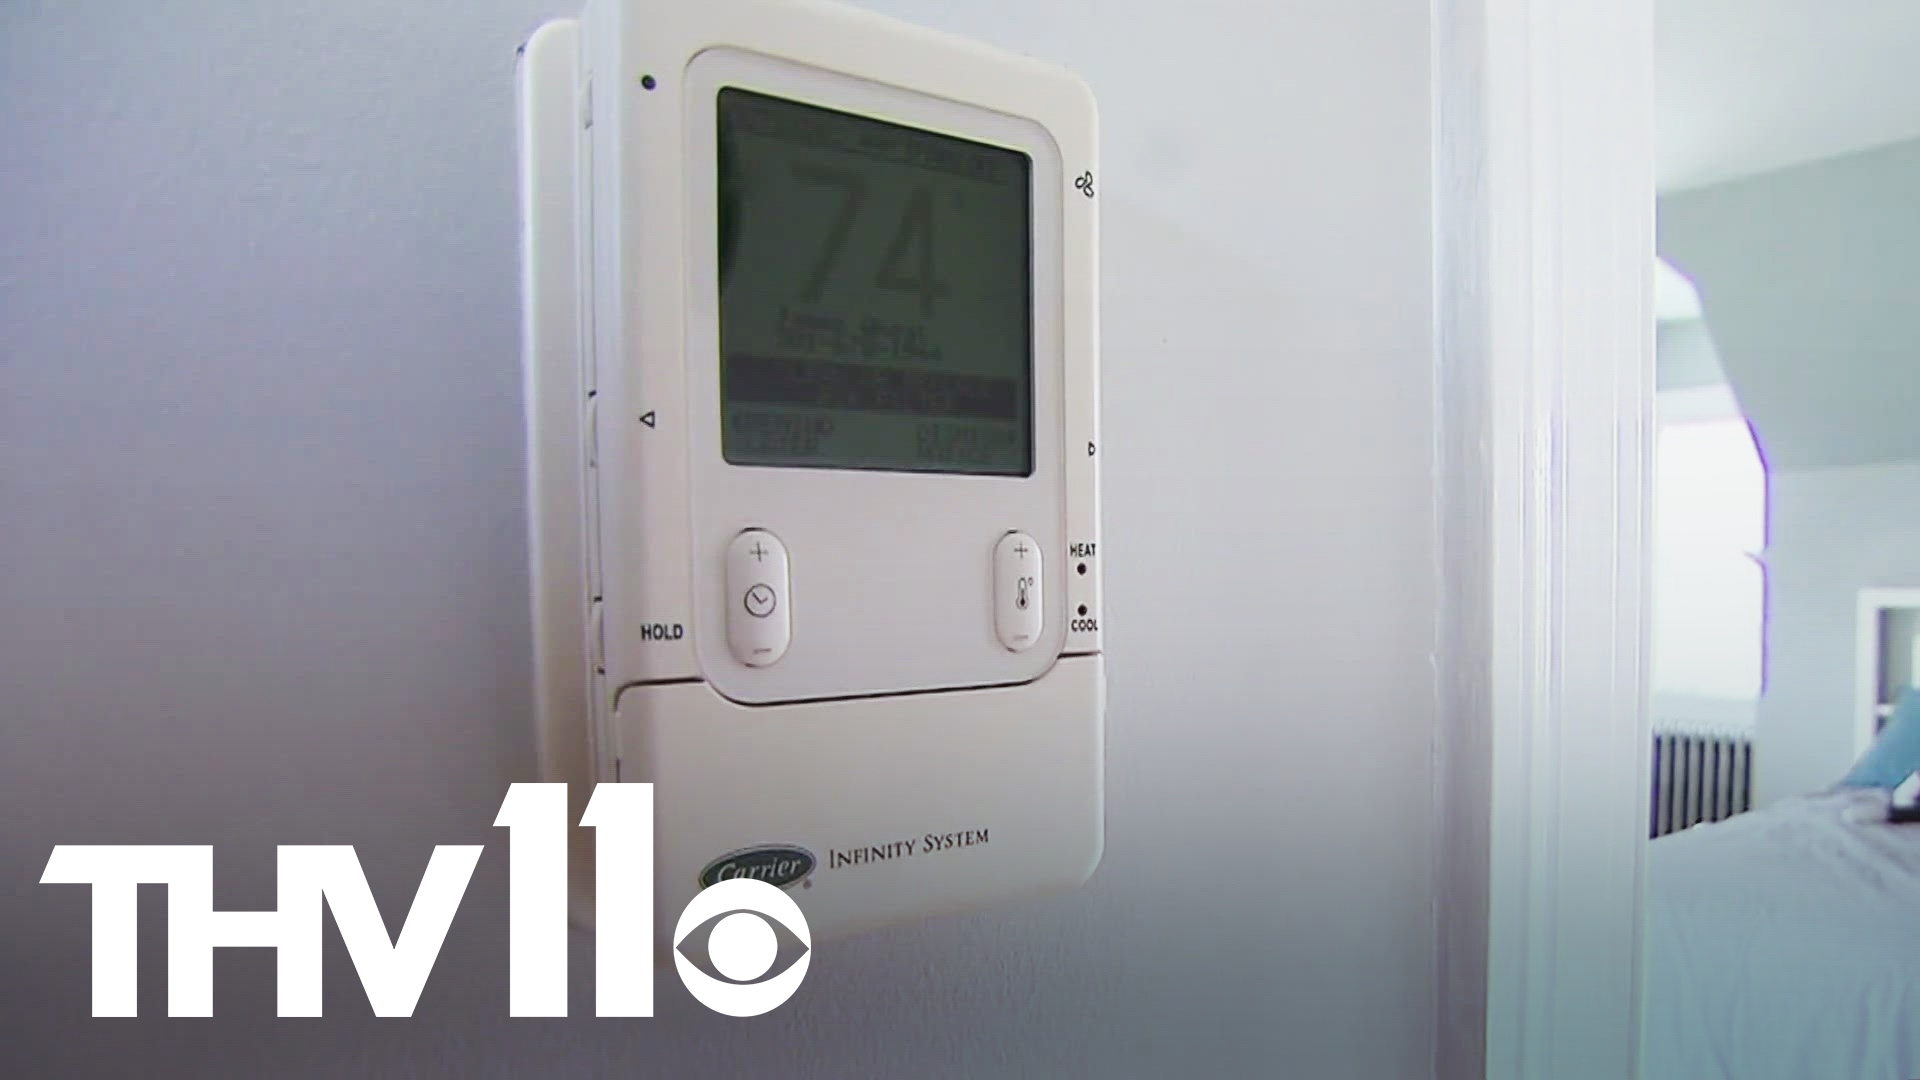 Arkansans will soon be able to apply for financial assistance for electricity bills starting on July 8 through the Low-Income Home Energy Assistance Program.